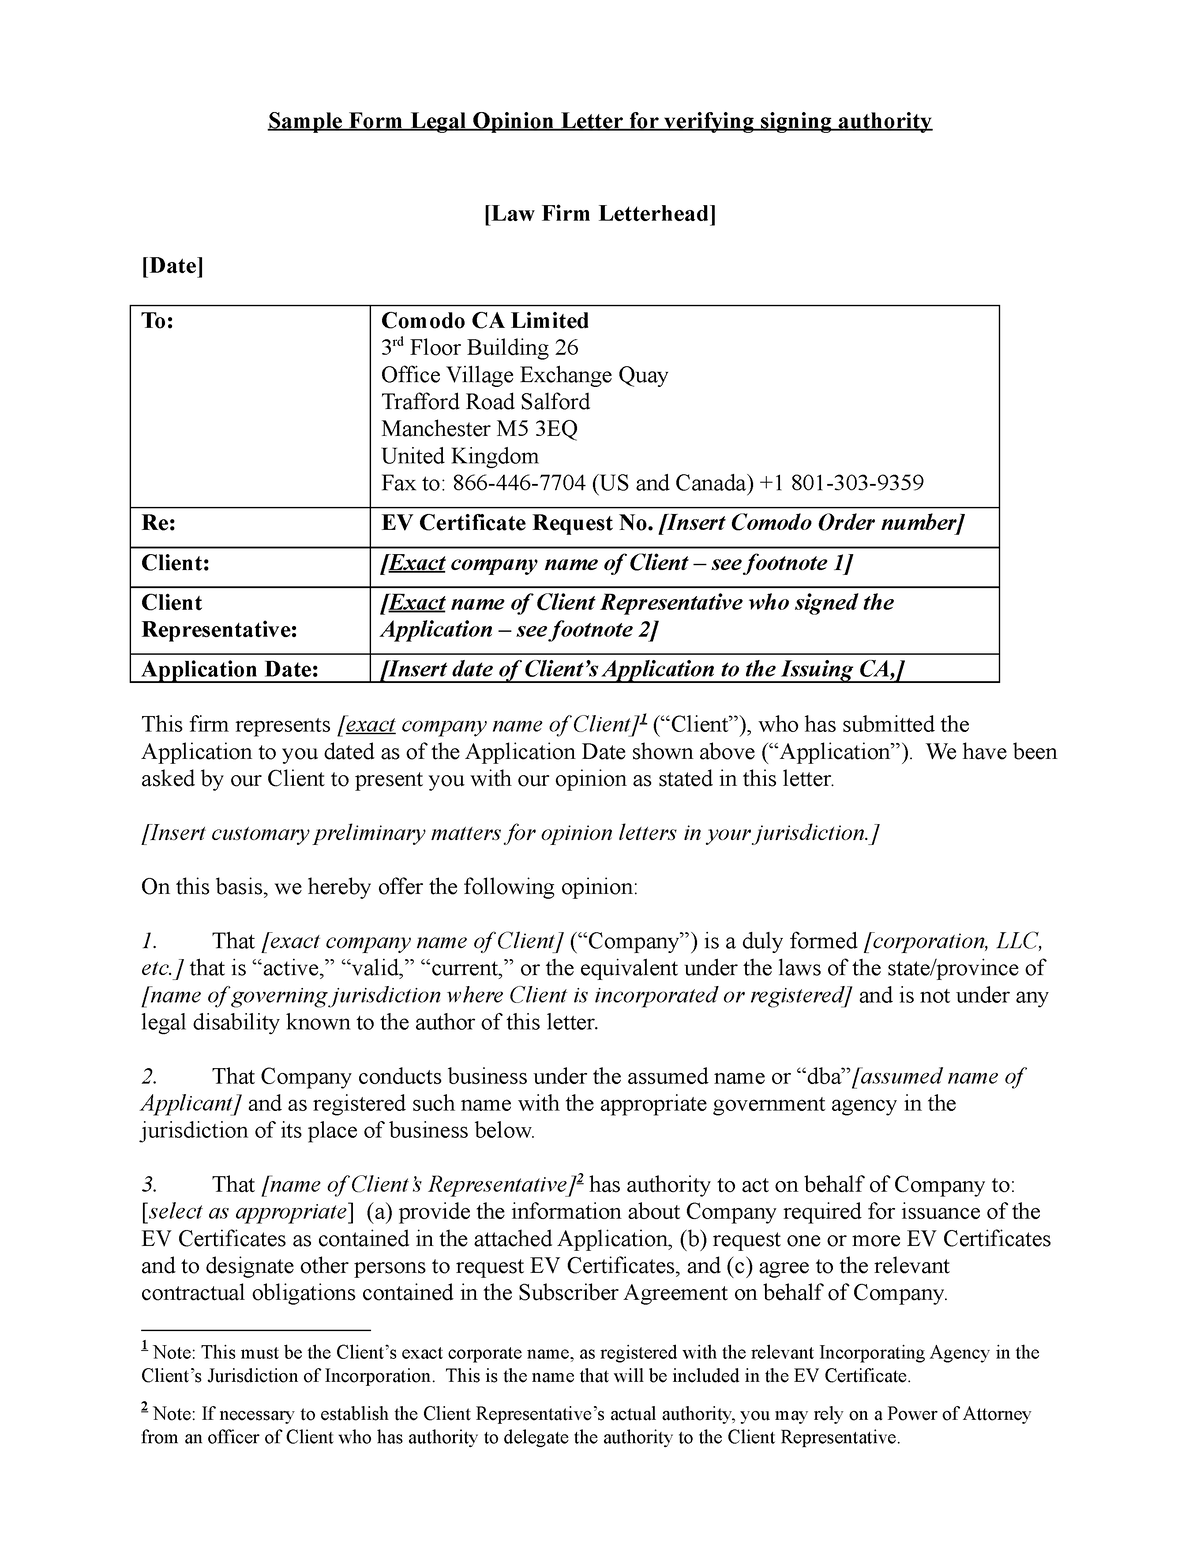 Legal Opinion Letter Please Give As Much Additional Information As Possible Sample Form 9197